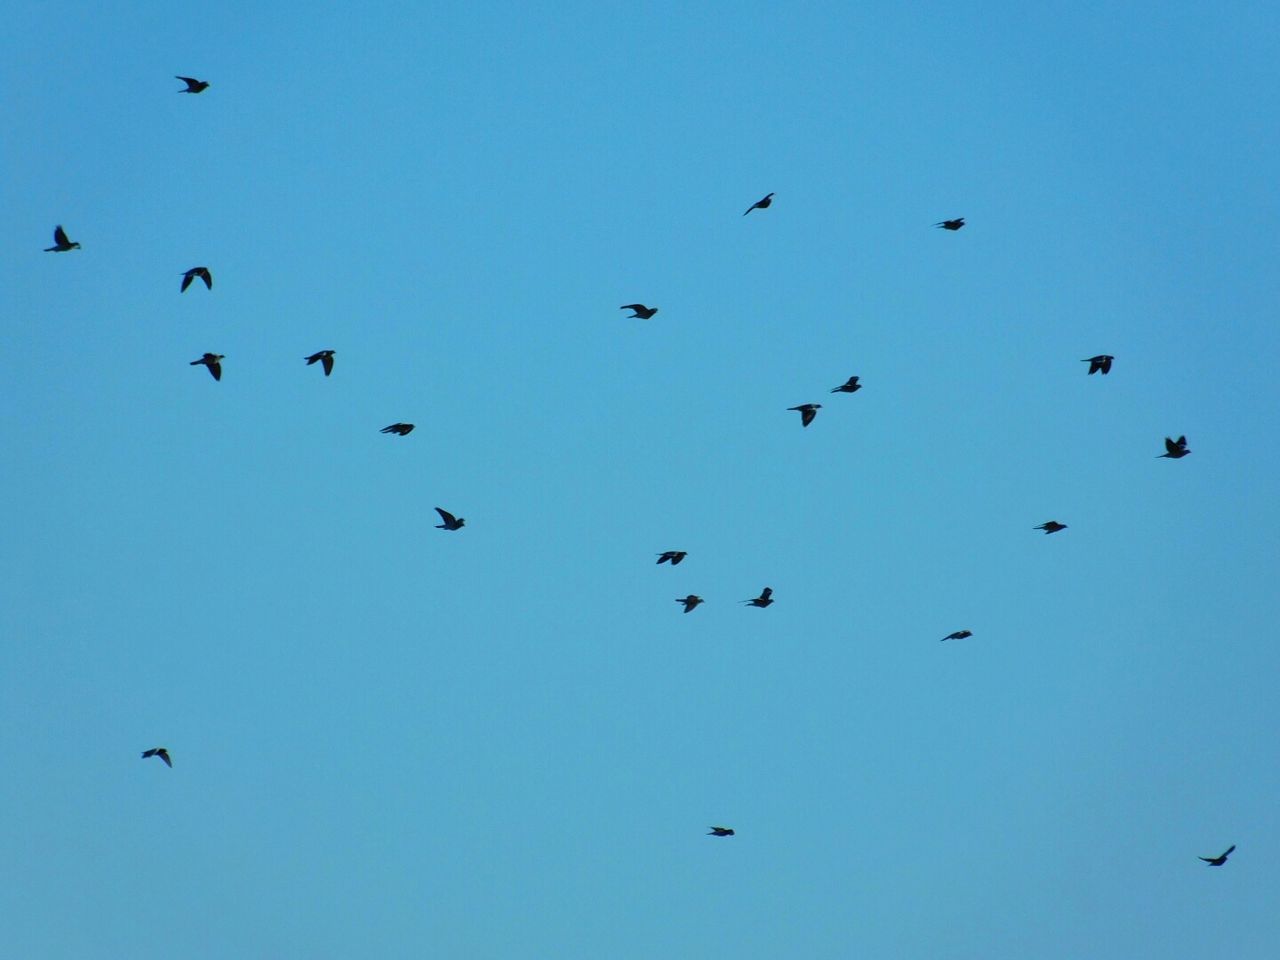 LOW ANGLE VIEW OF BIRDS IN SKY